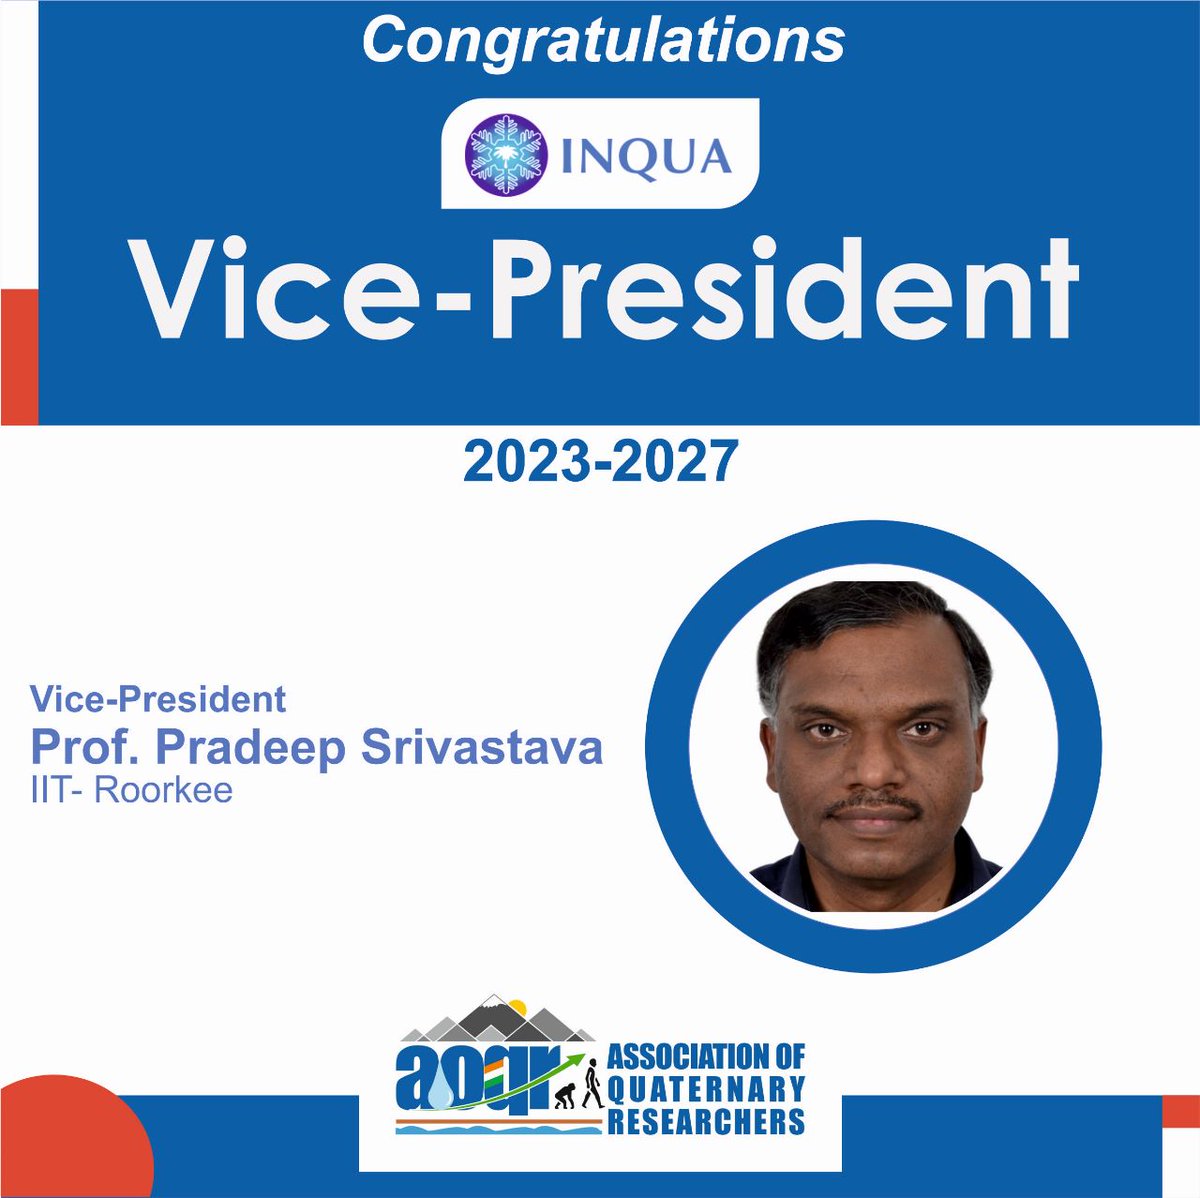 Thrilled to celebrate Prof. Pradeep Srivastava's election as Vice President of INQIA! 🎉 A well-deserved recognition for his exceptional leadership and expertise. Congratulations, Prof. Shrivastava, on this remarkable achievement! 🌟